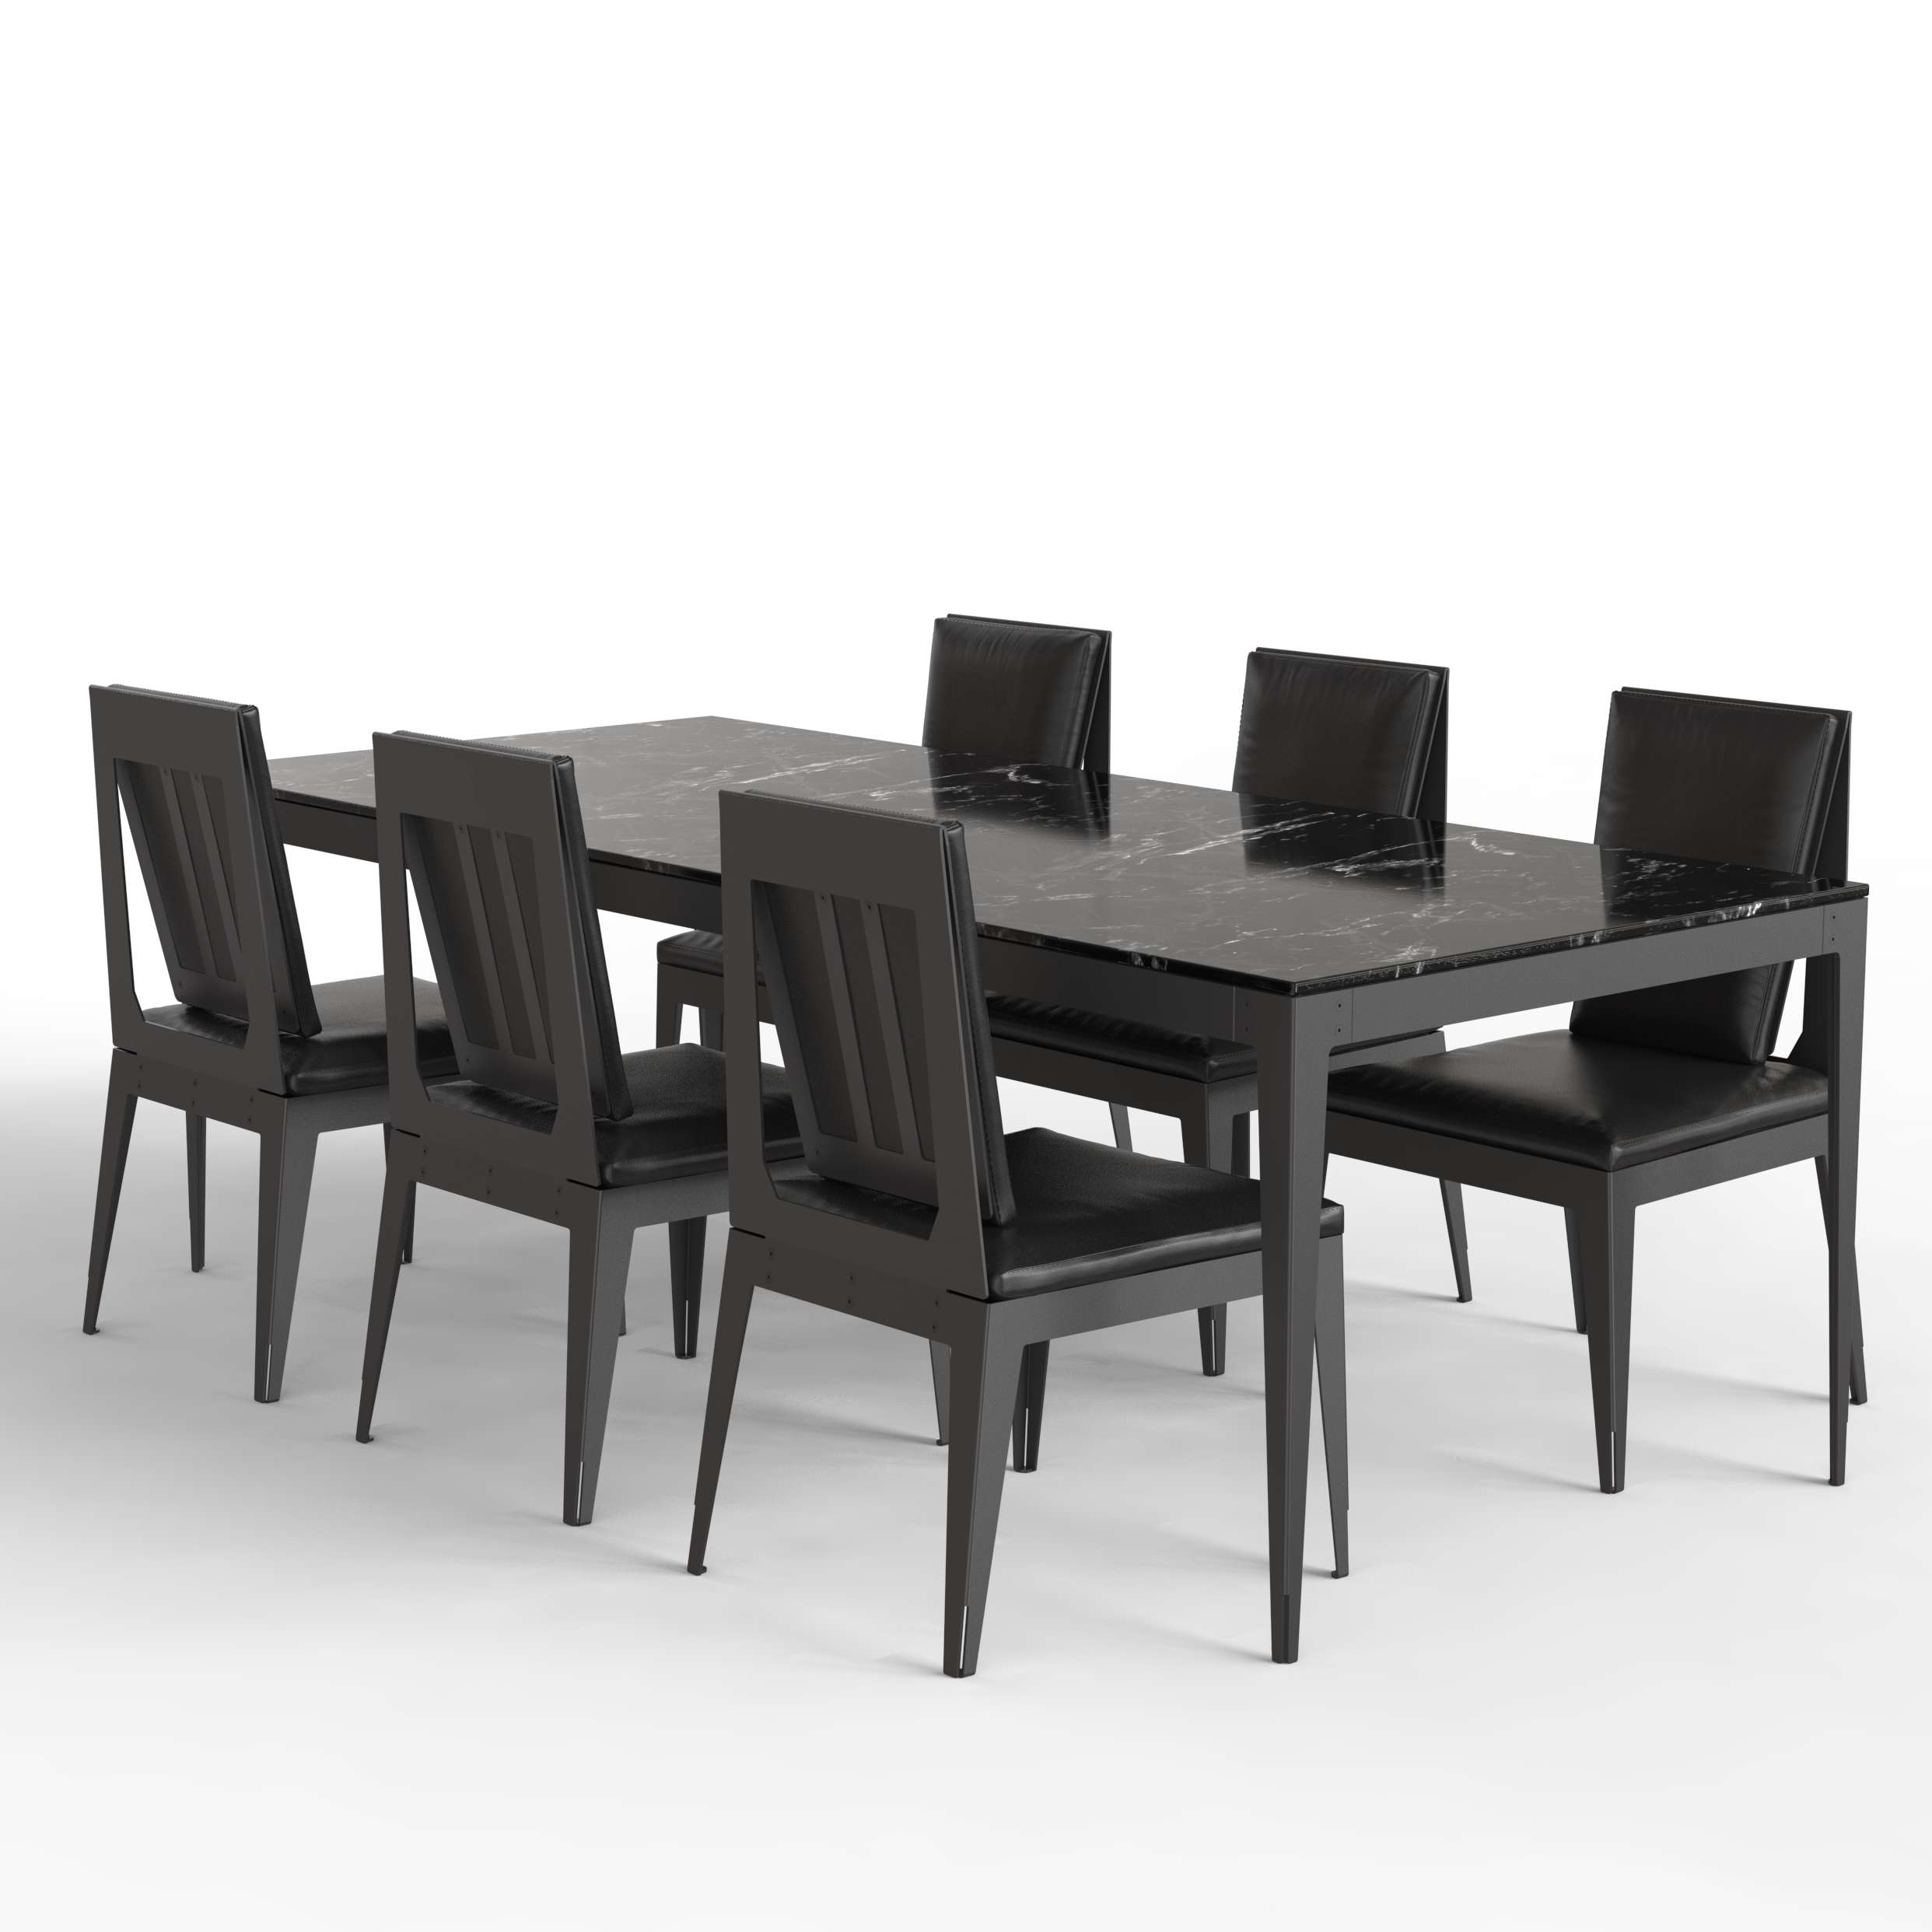 851-elevenstories-renders---dining-table-and-chairs-17063258655223.png